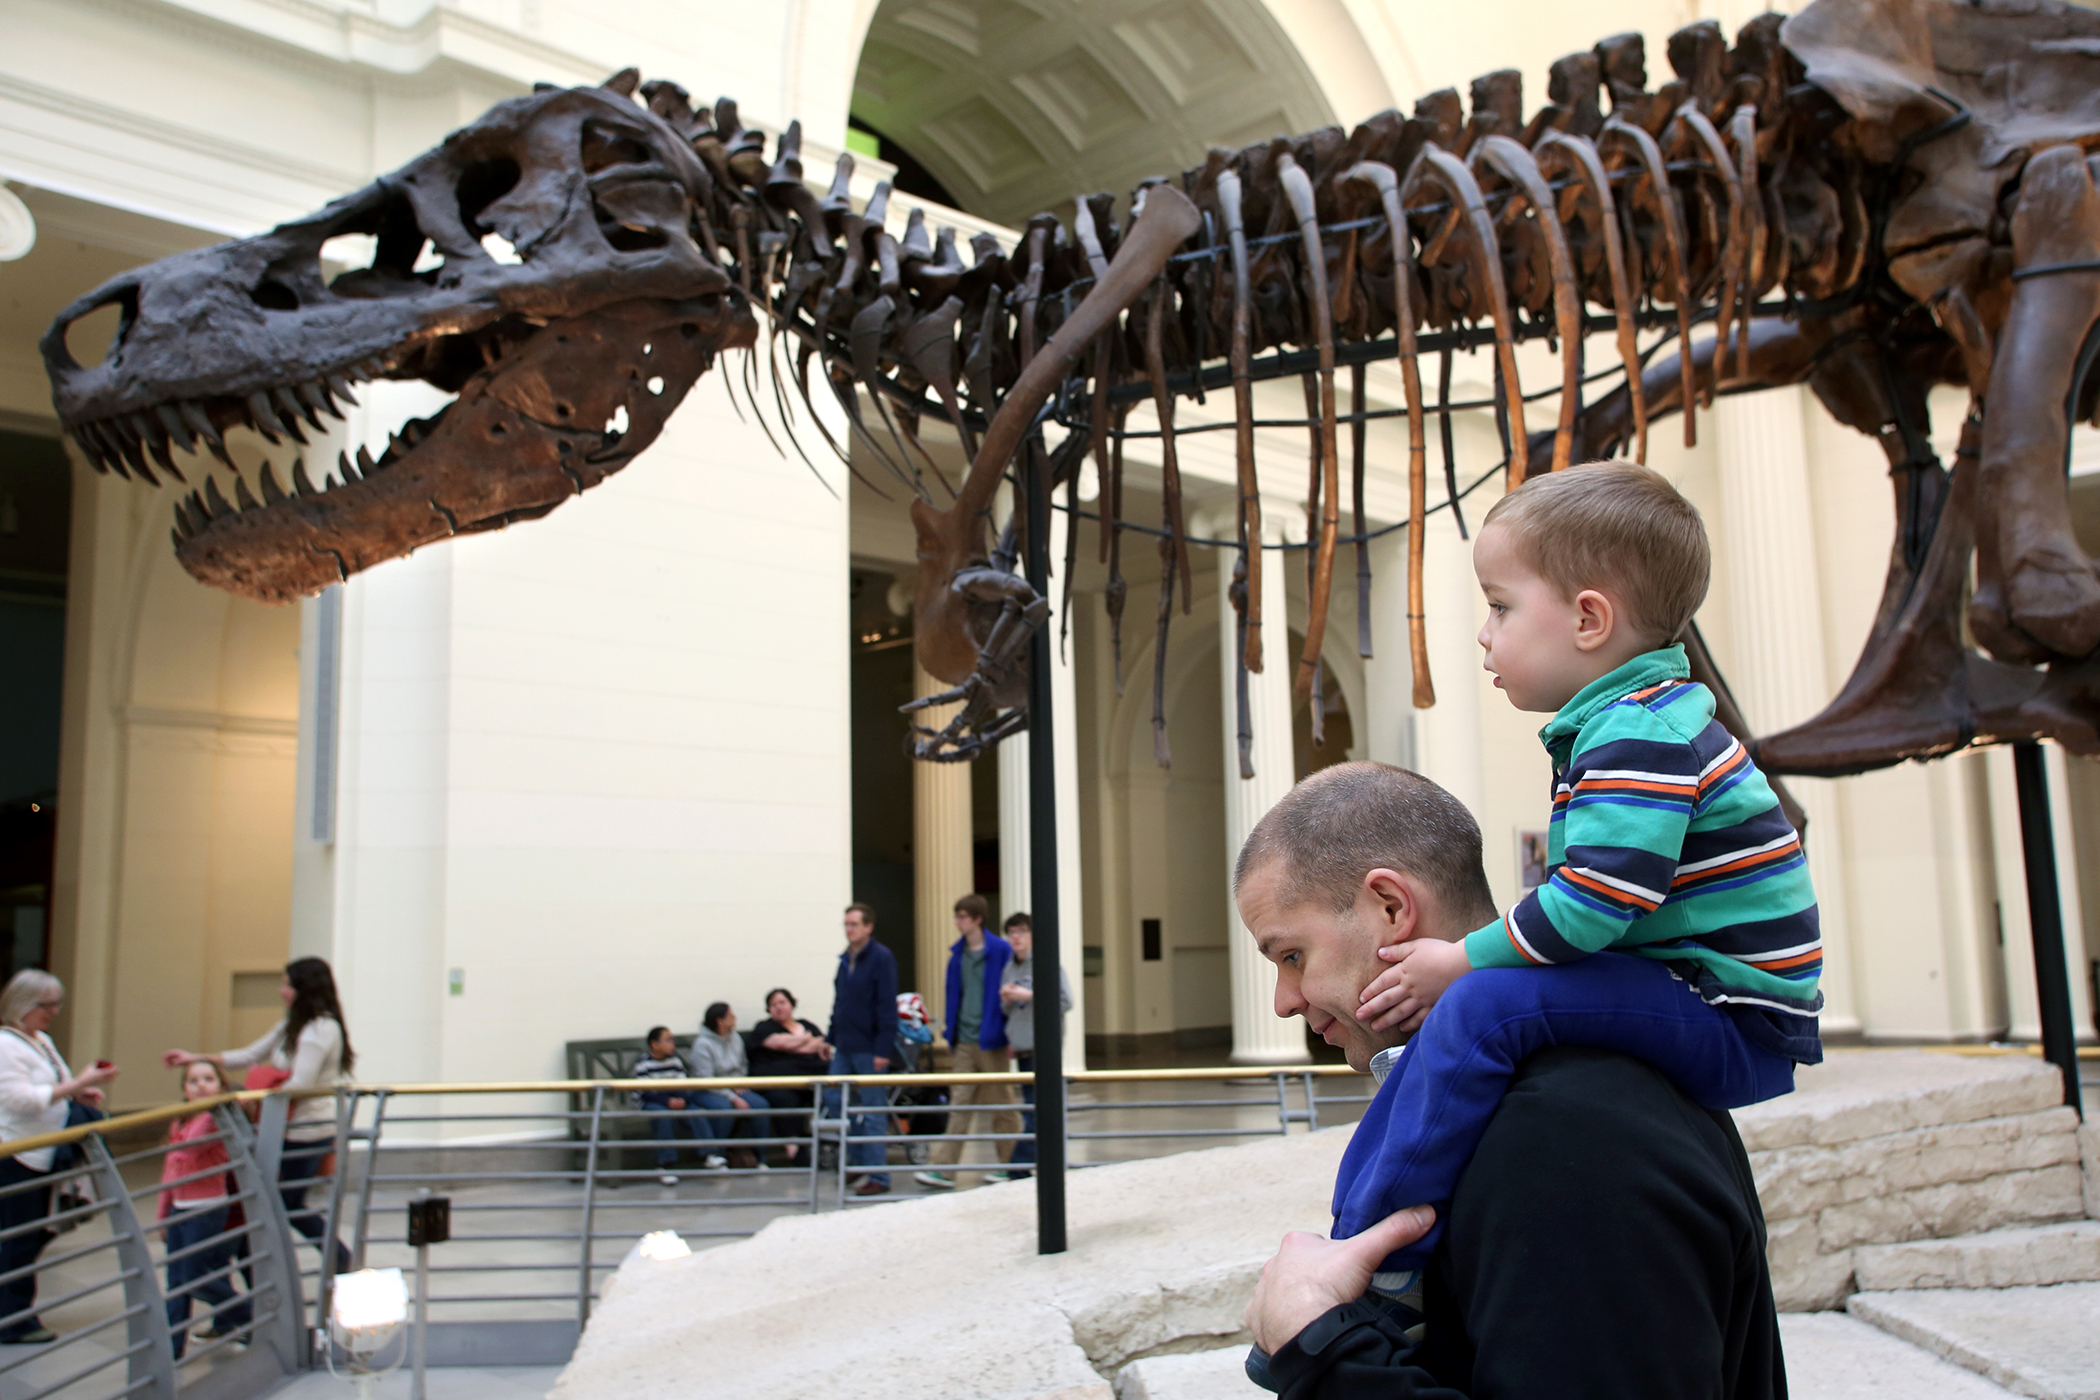 Visitors to the Field Museum of Natural History in Chicago, Illinois admire Sue, one of the largest, most extensive and best-preserved Tyrannosaurus rex specimens ever found, April 1, 2014. Named after Sue Hendrickson, the paleontologist who discovered the fossil in 1990, it was acquired at auction by the Field Museum in 1997 for $8.36 million, the highest amount ever paid for a dinosaur fossil.